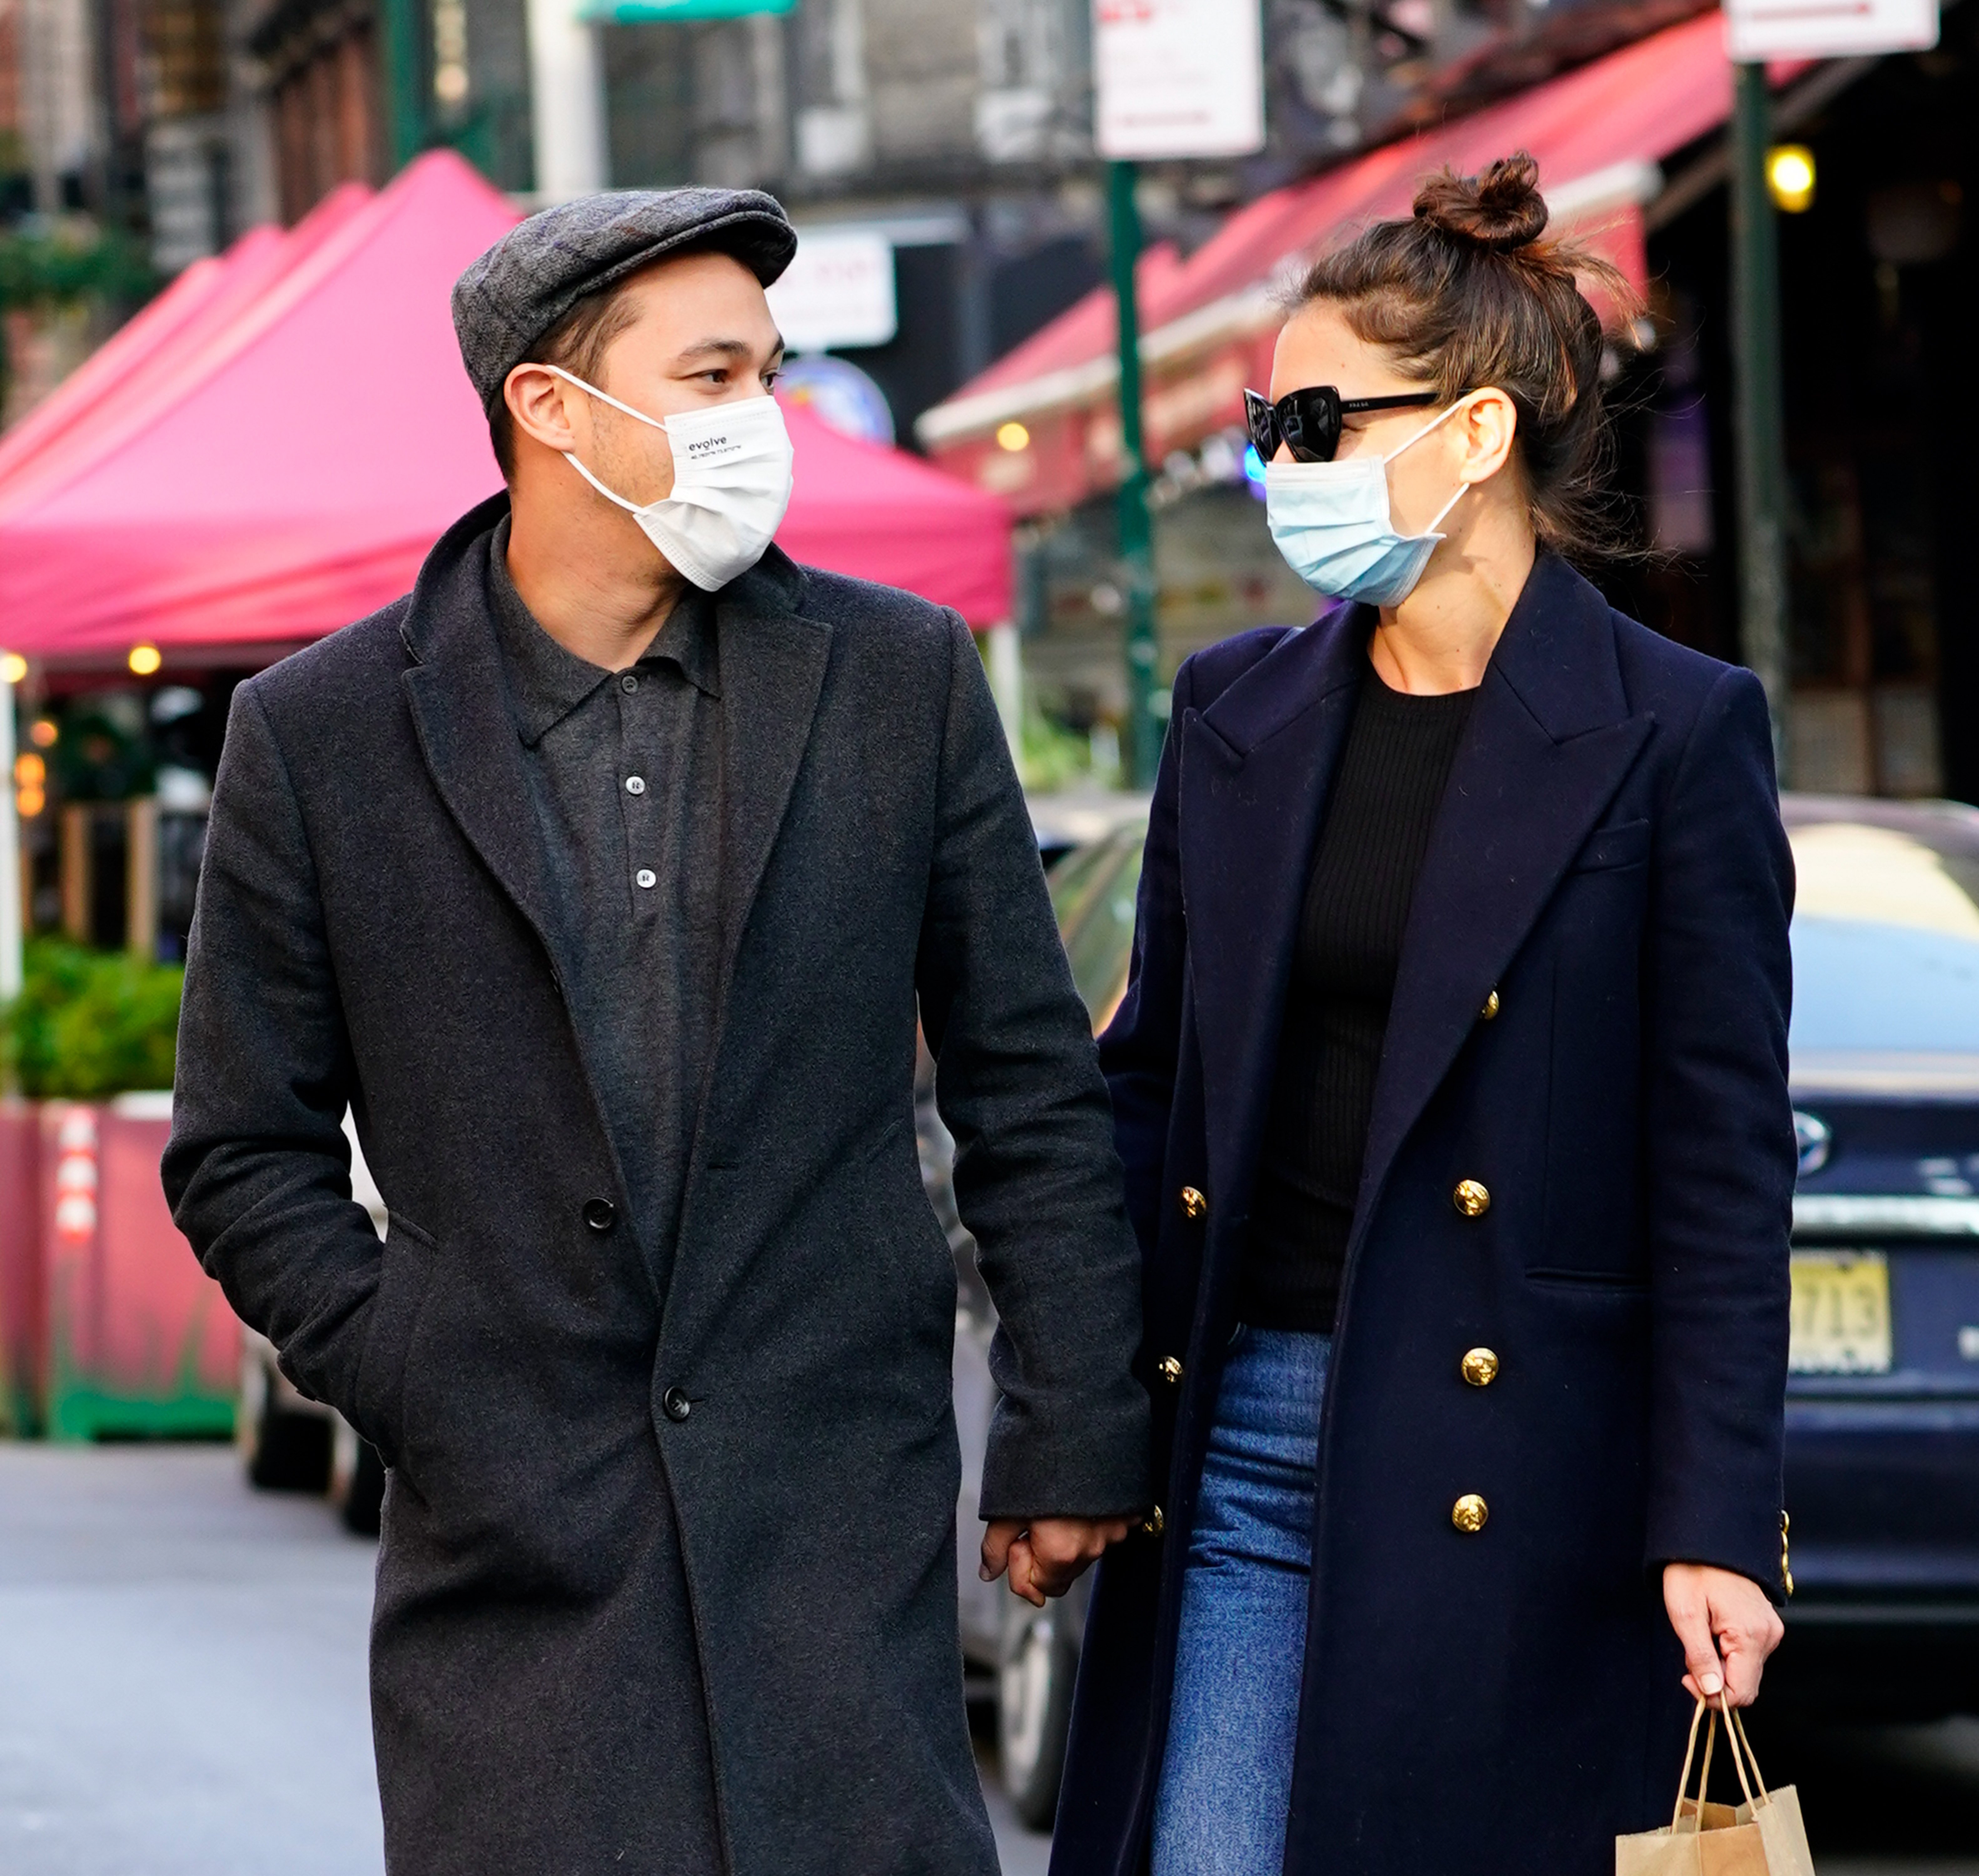 Katie Holmes and Emilio Vitolo Jr. seen on September 22, 2020 in New York City | Photo: Getty Images